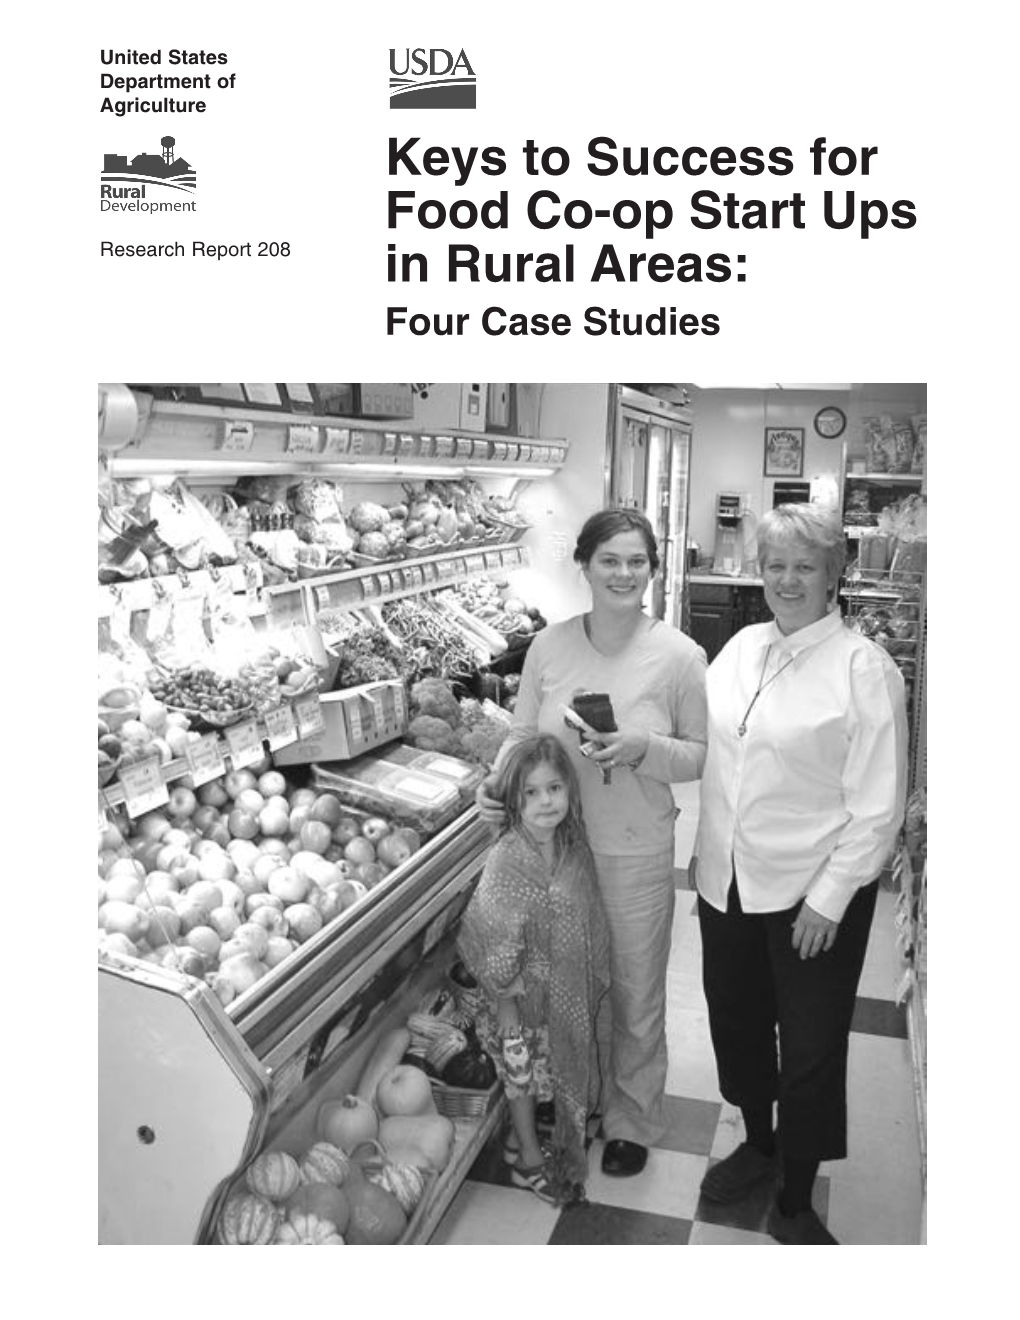 Keys to Success for Food Co-Op Start Ups in Rural Areas: Four Case Studies